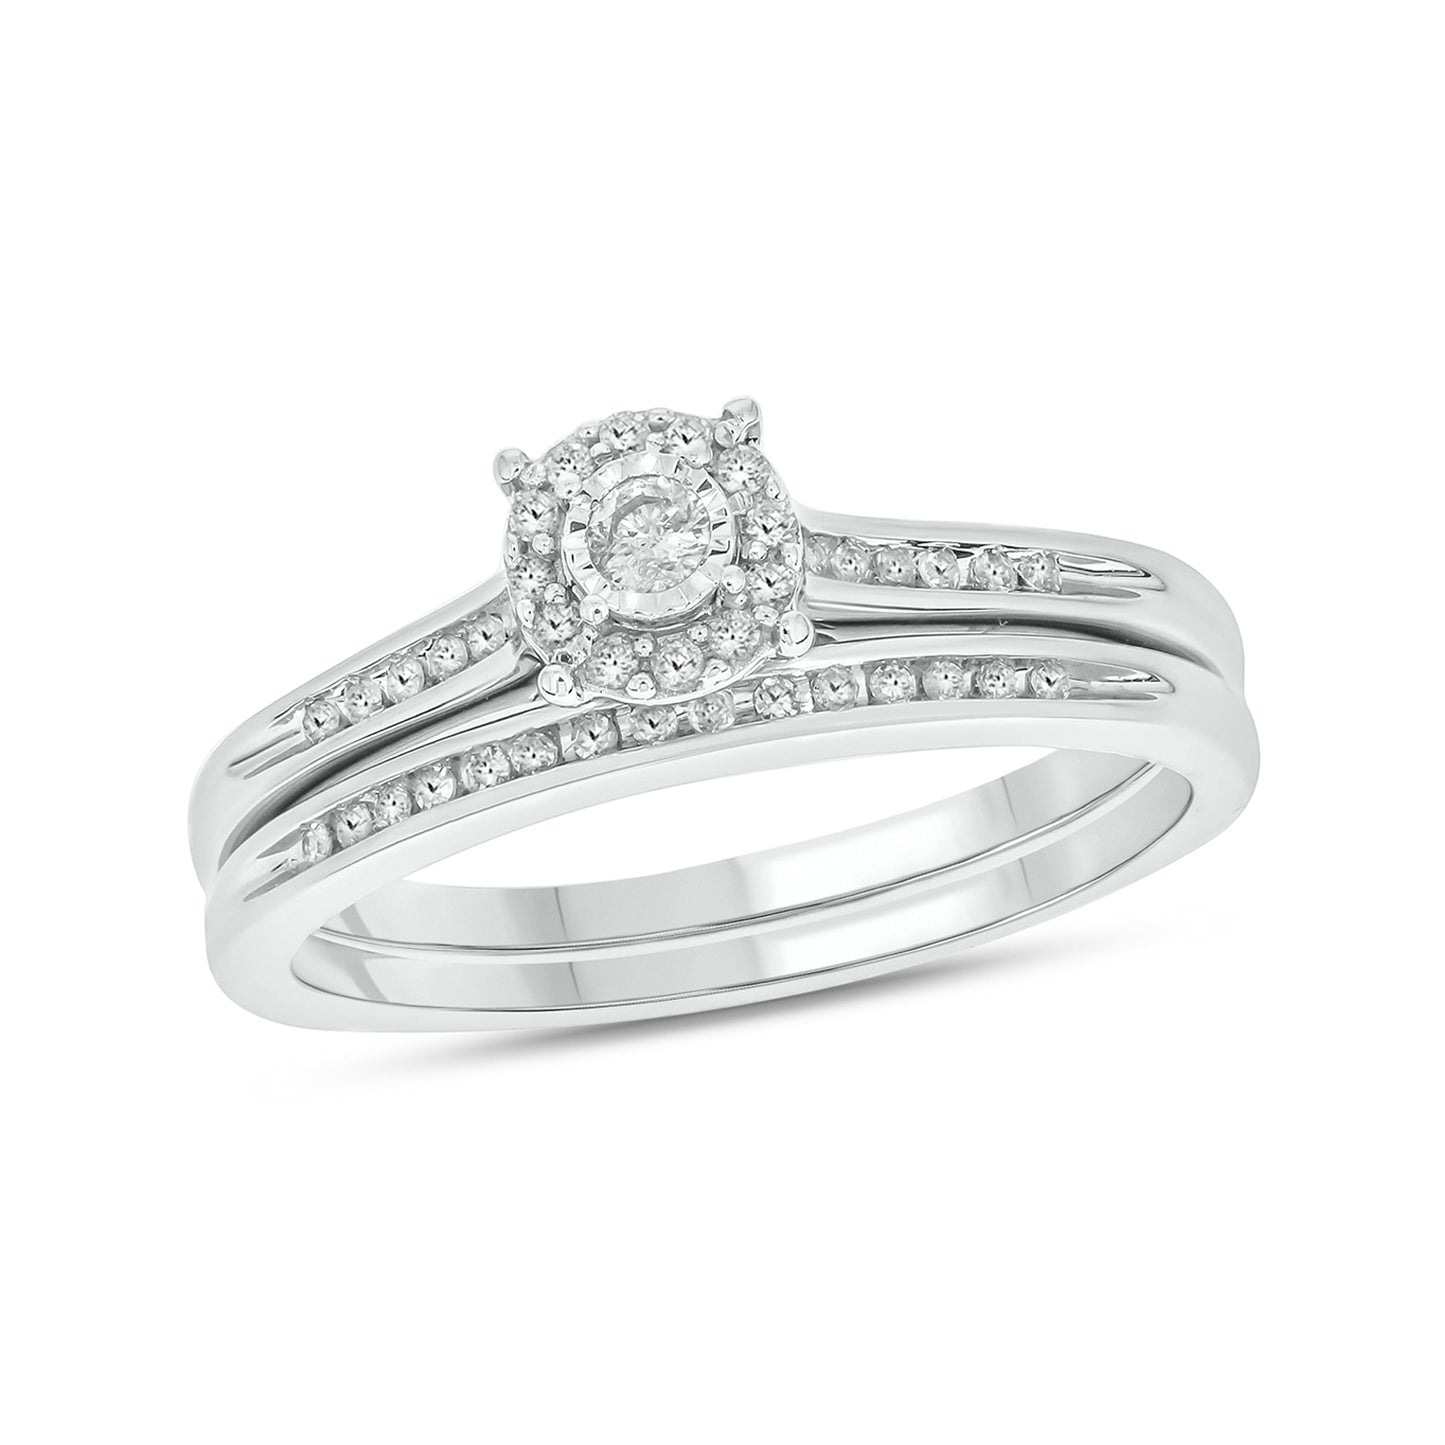 Classic Round Bridal Ring Set in Sterling Silver, Authentic Natural Diamonds